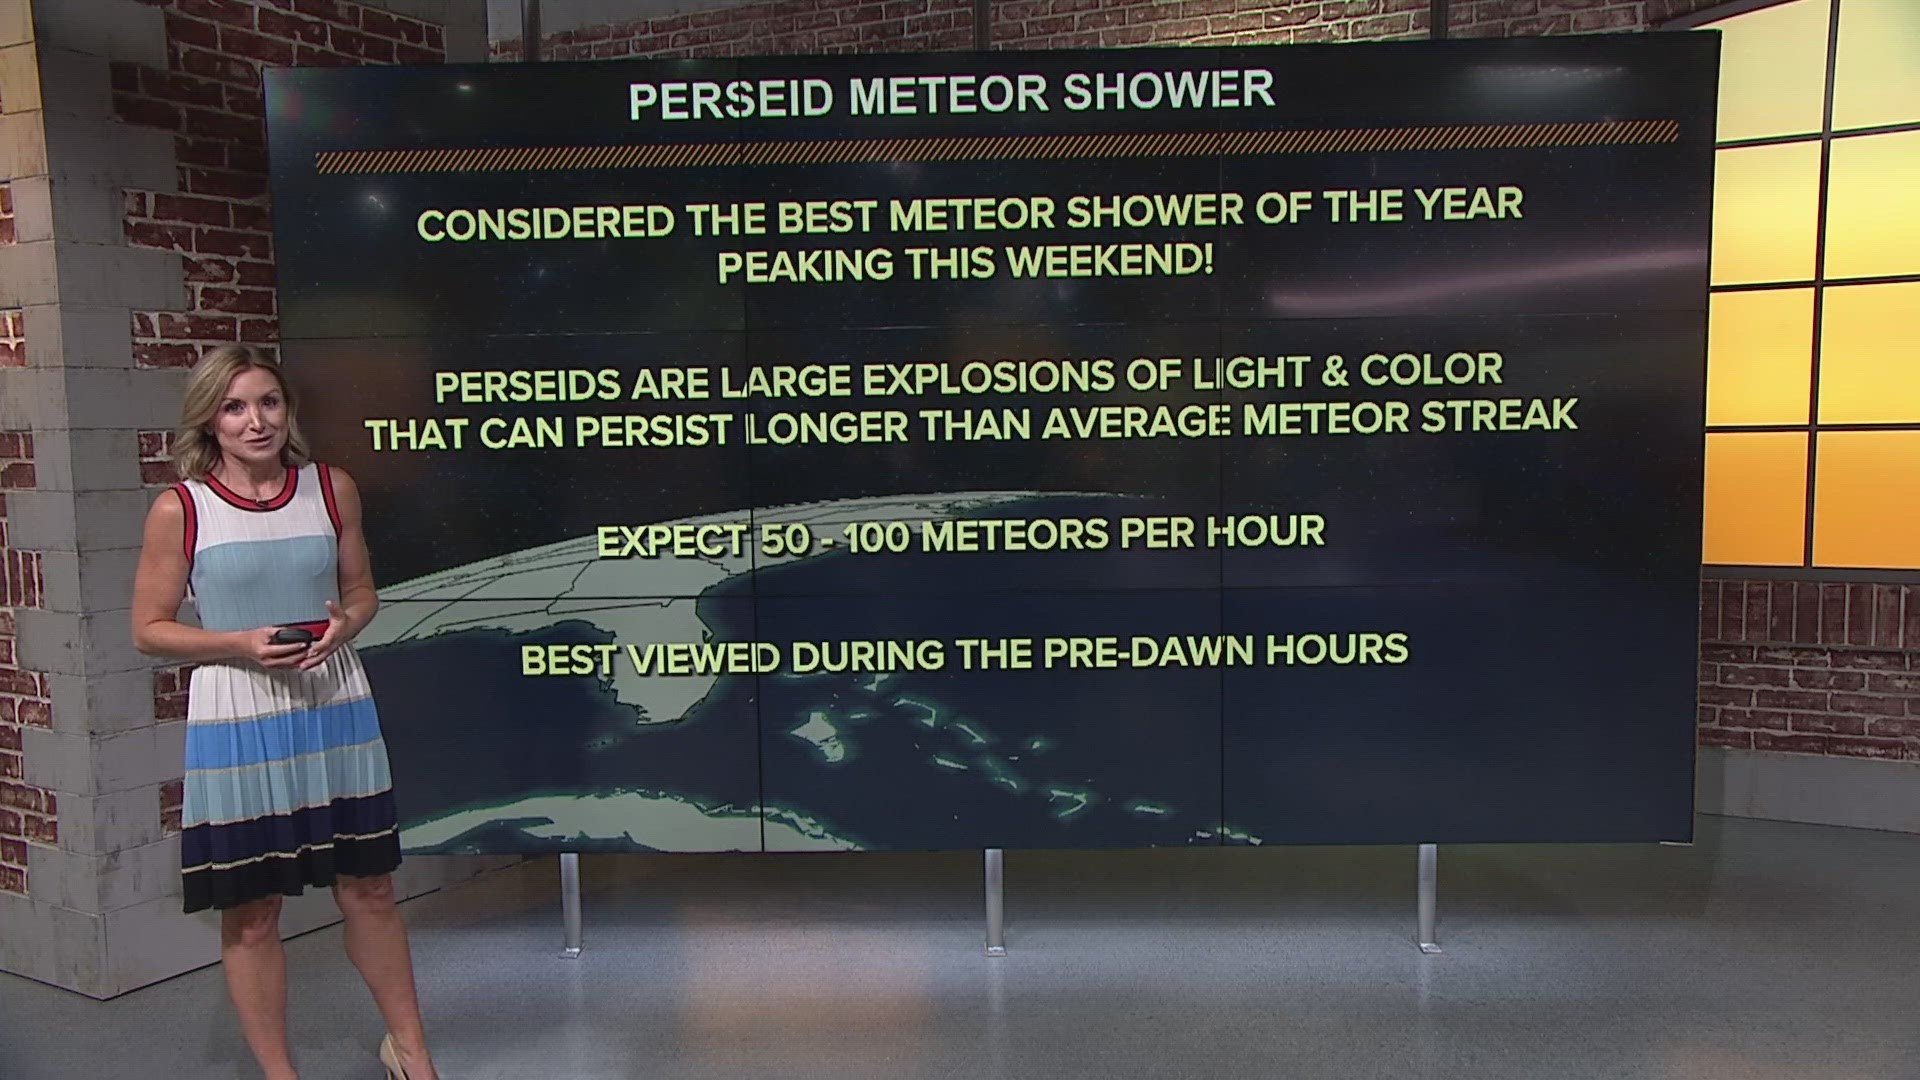 The best meteor shower of the whole year is expected to peak Aug. 12-13.